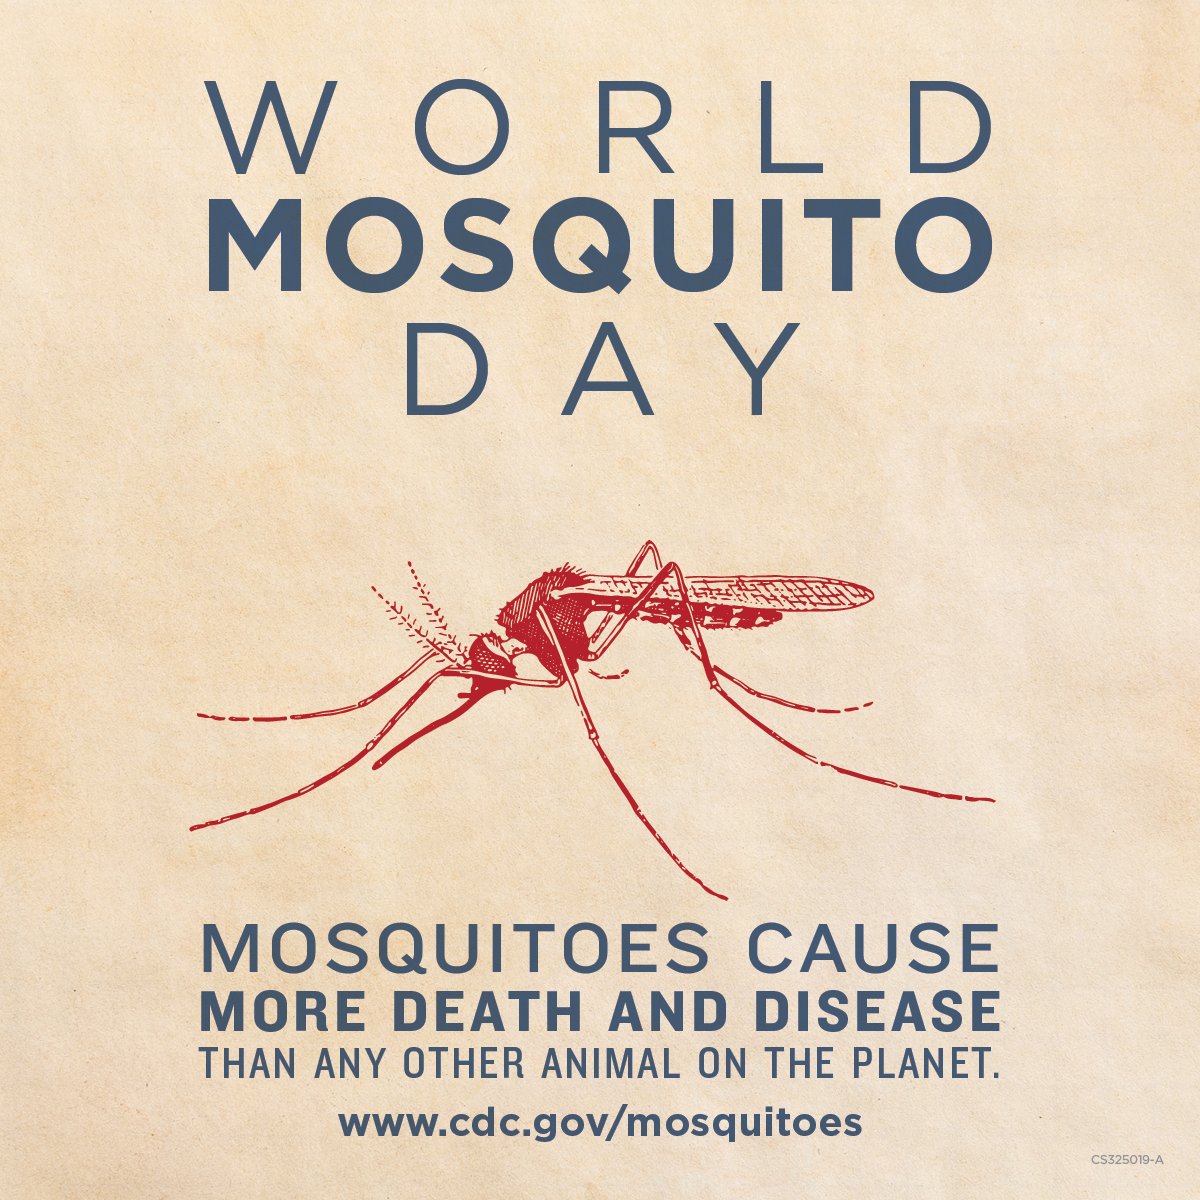 Despite their size, mosquitoes transmit many pathogens and cause more death and disease than any other animal on the planet! Visit cdc.gov/mosquitoes/ for information on mosquito bite prevention on #WorldMosquitoDay, Aug 20, 2022!